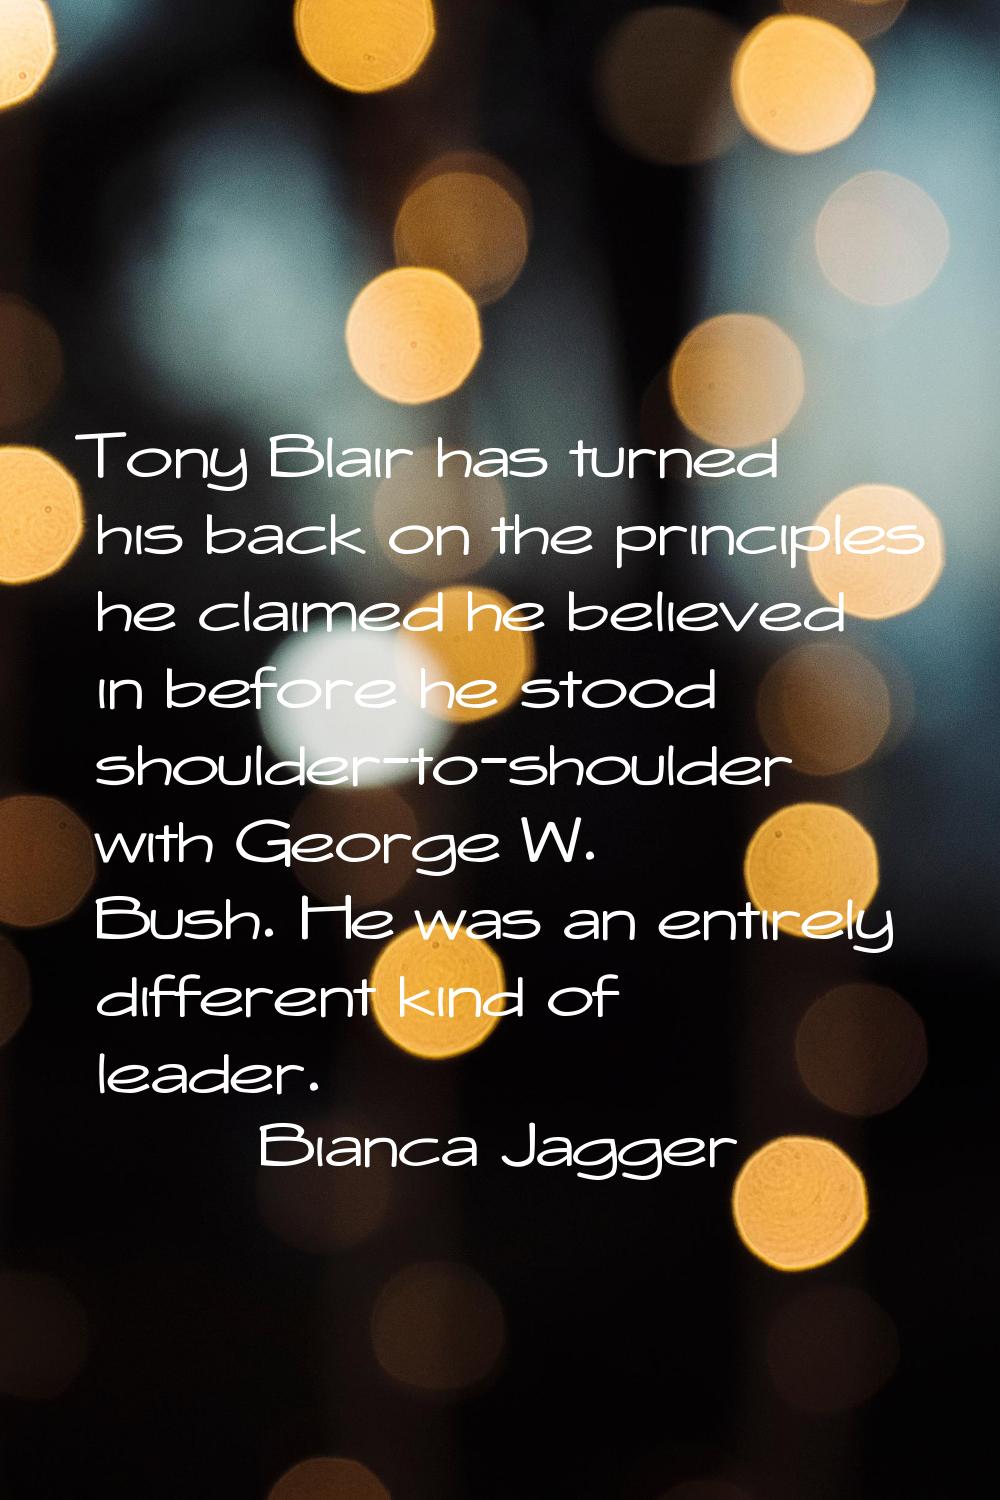 Tony Blair has turned his back on the principles he claimed he believed in before he stood shoulder